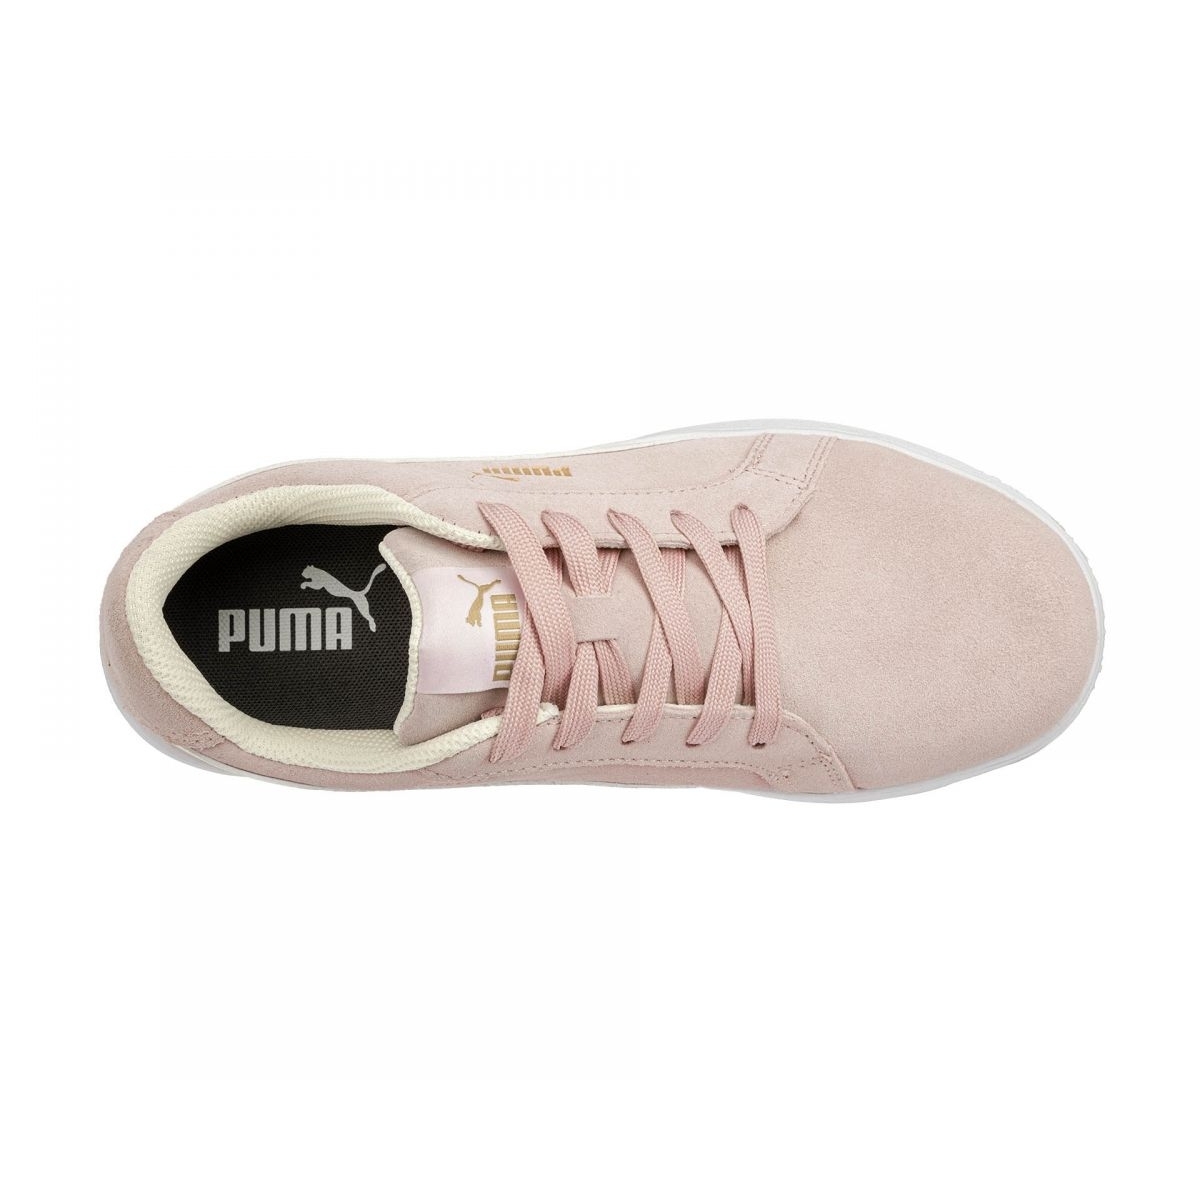 PUMA Safety Women's Iconic Low Composite Toe EH Work Shoes Pink Suede - 640145 PINK - PINK, 7.5